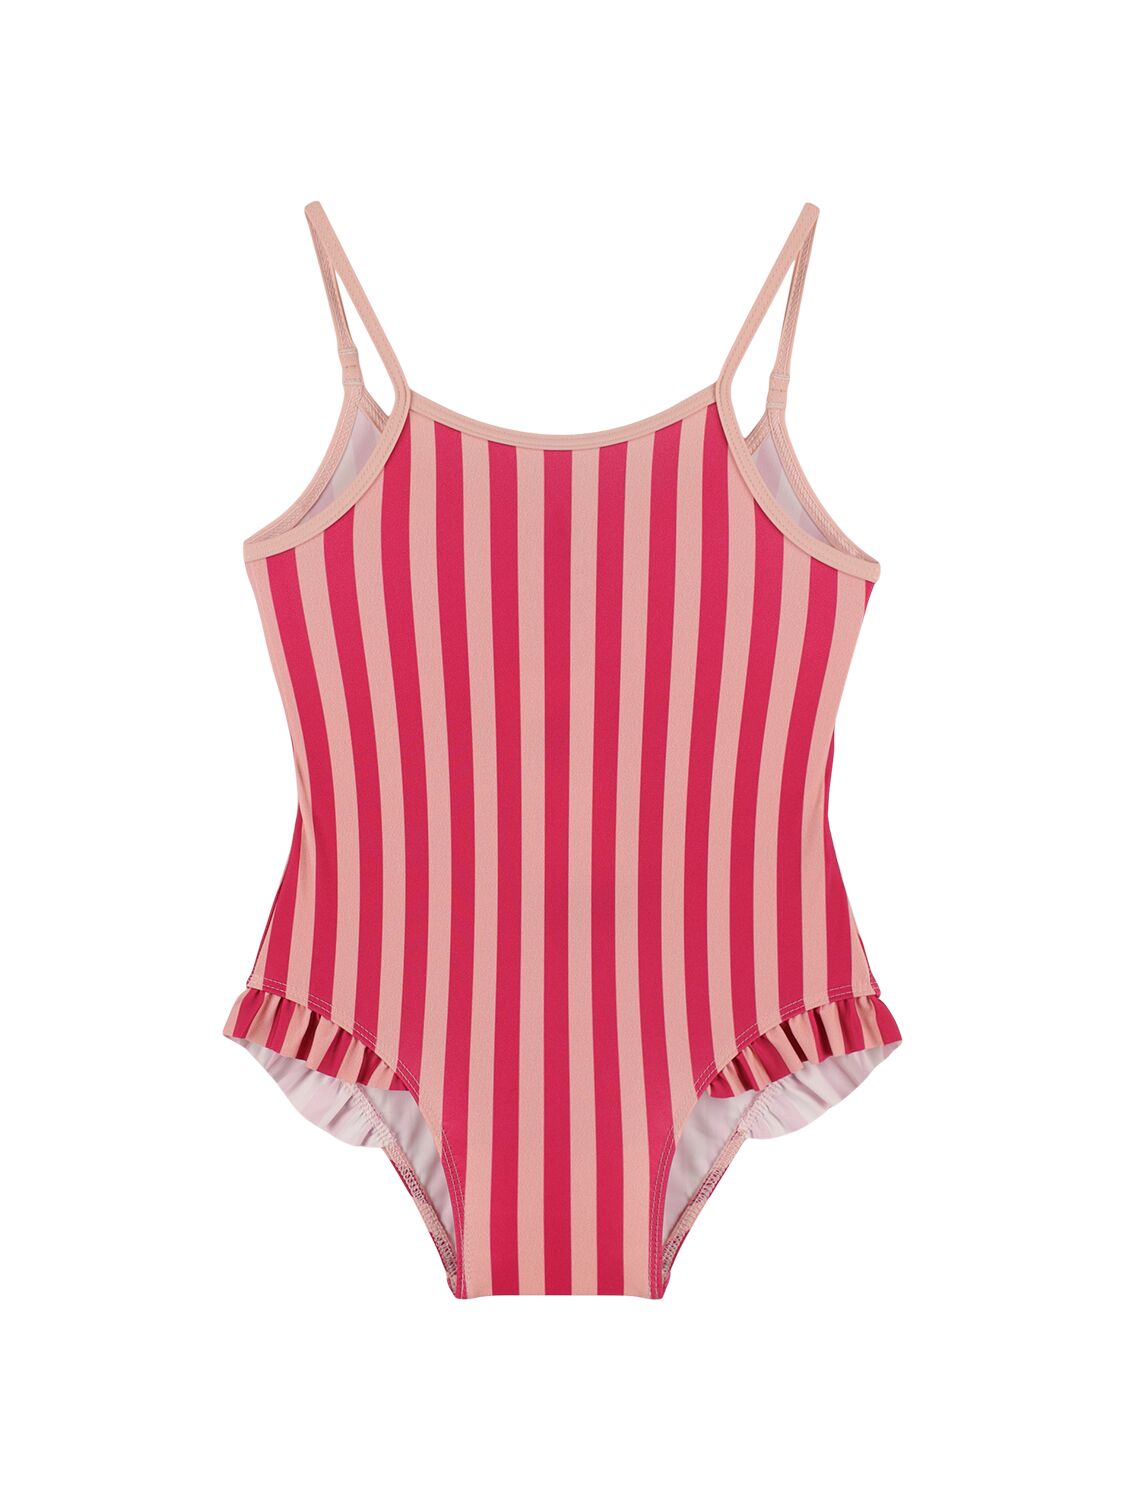 Image of Striped Tech One-piece Swimsuit